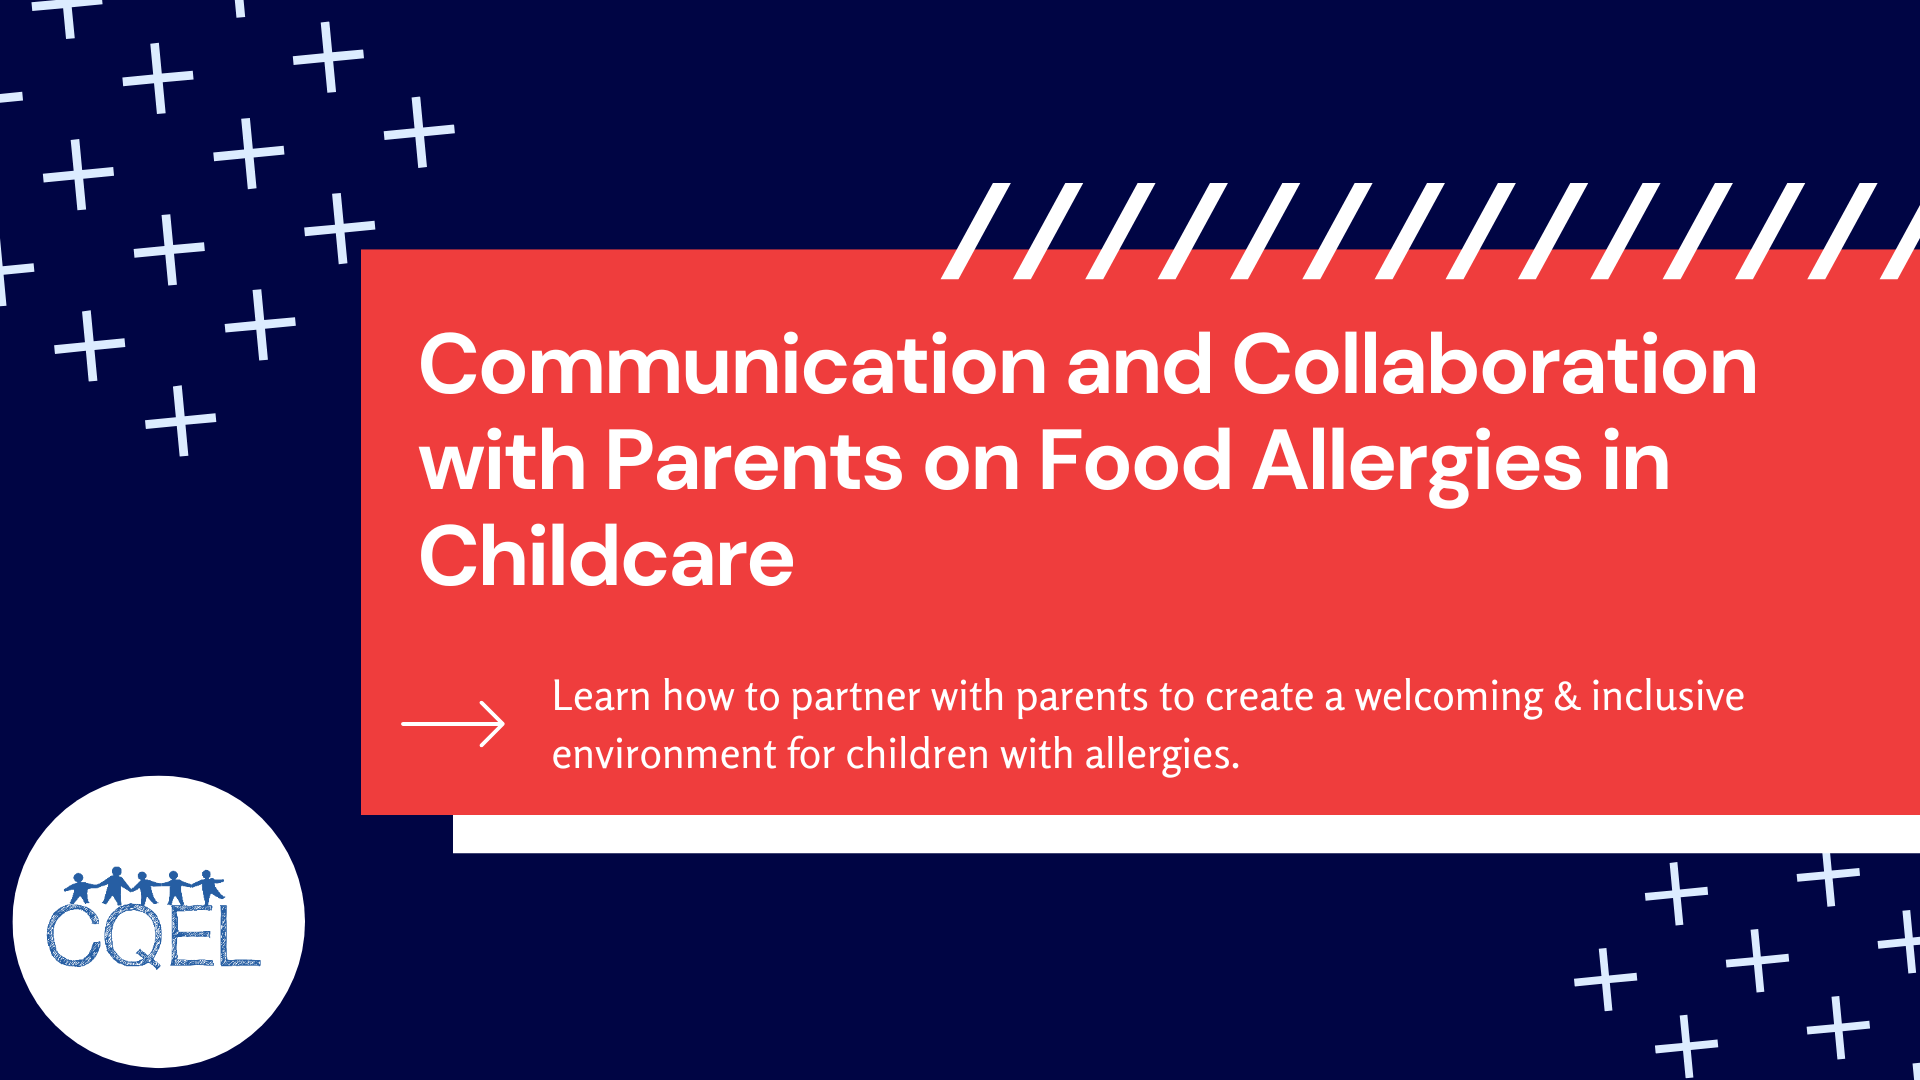 Communication and Collaboration with Parents on Food Allergies in Childcare